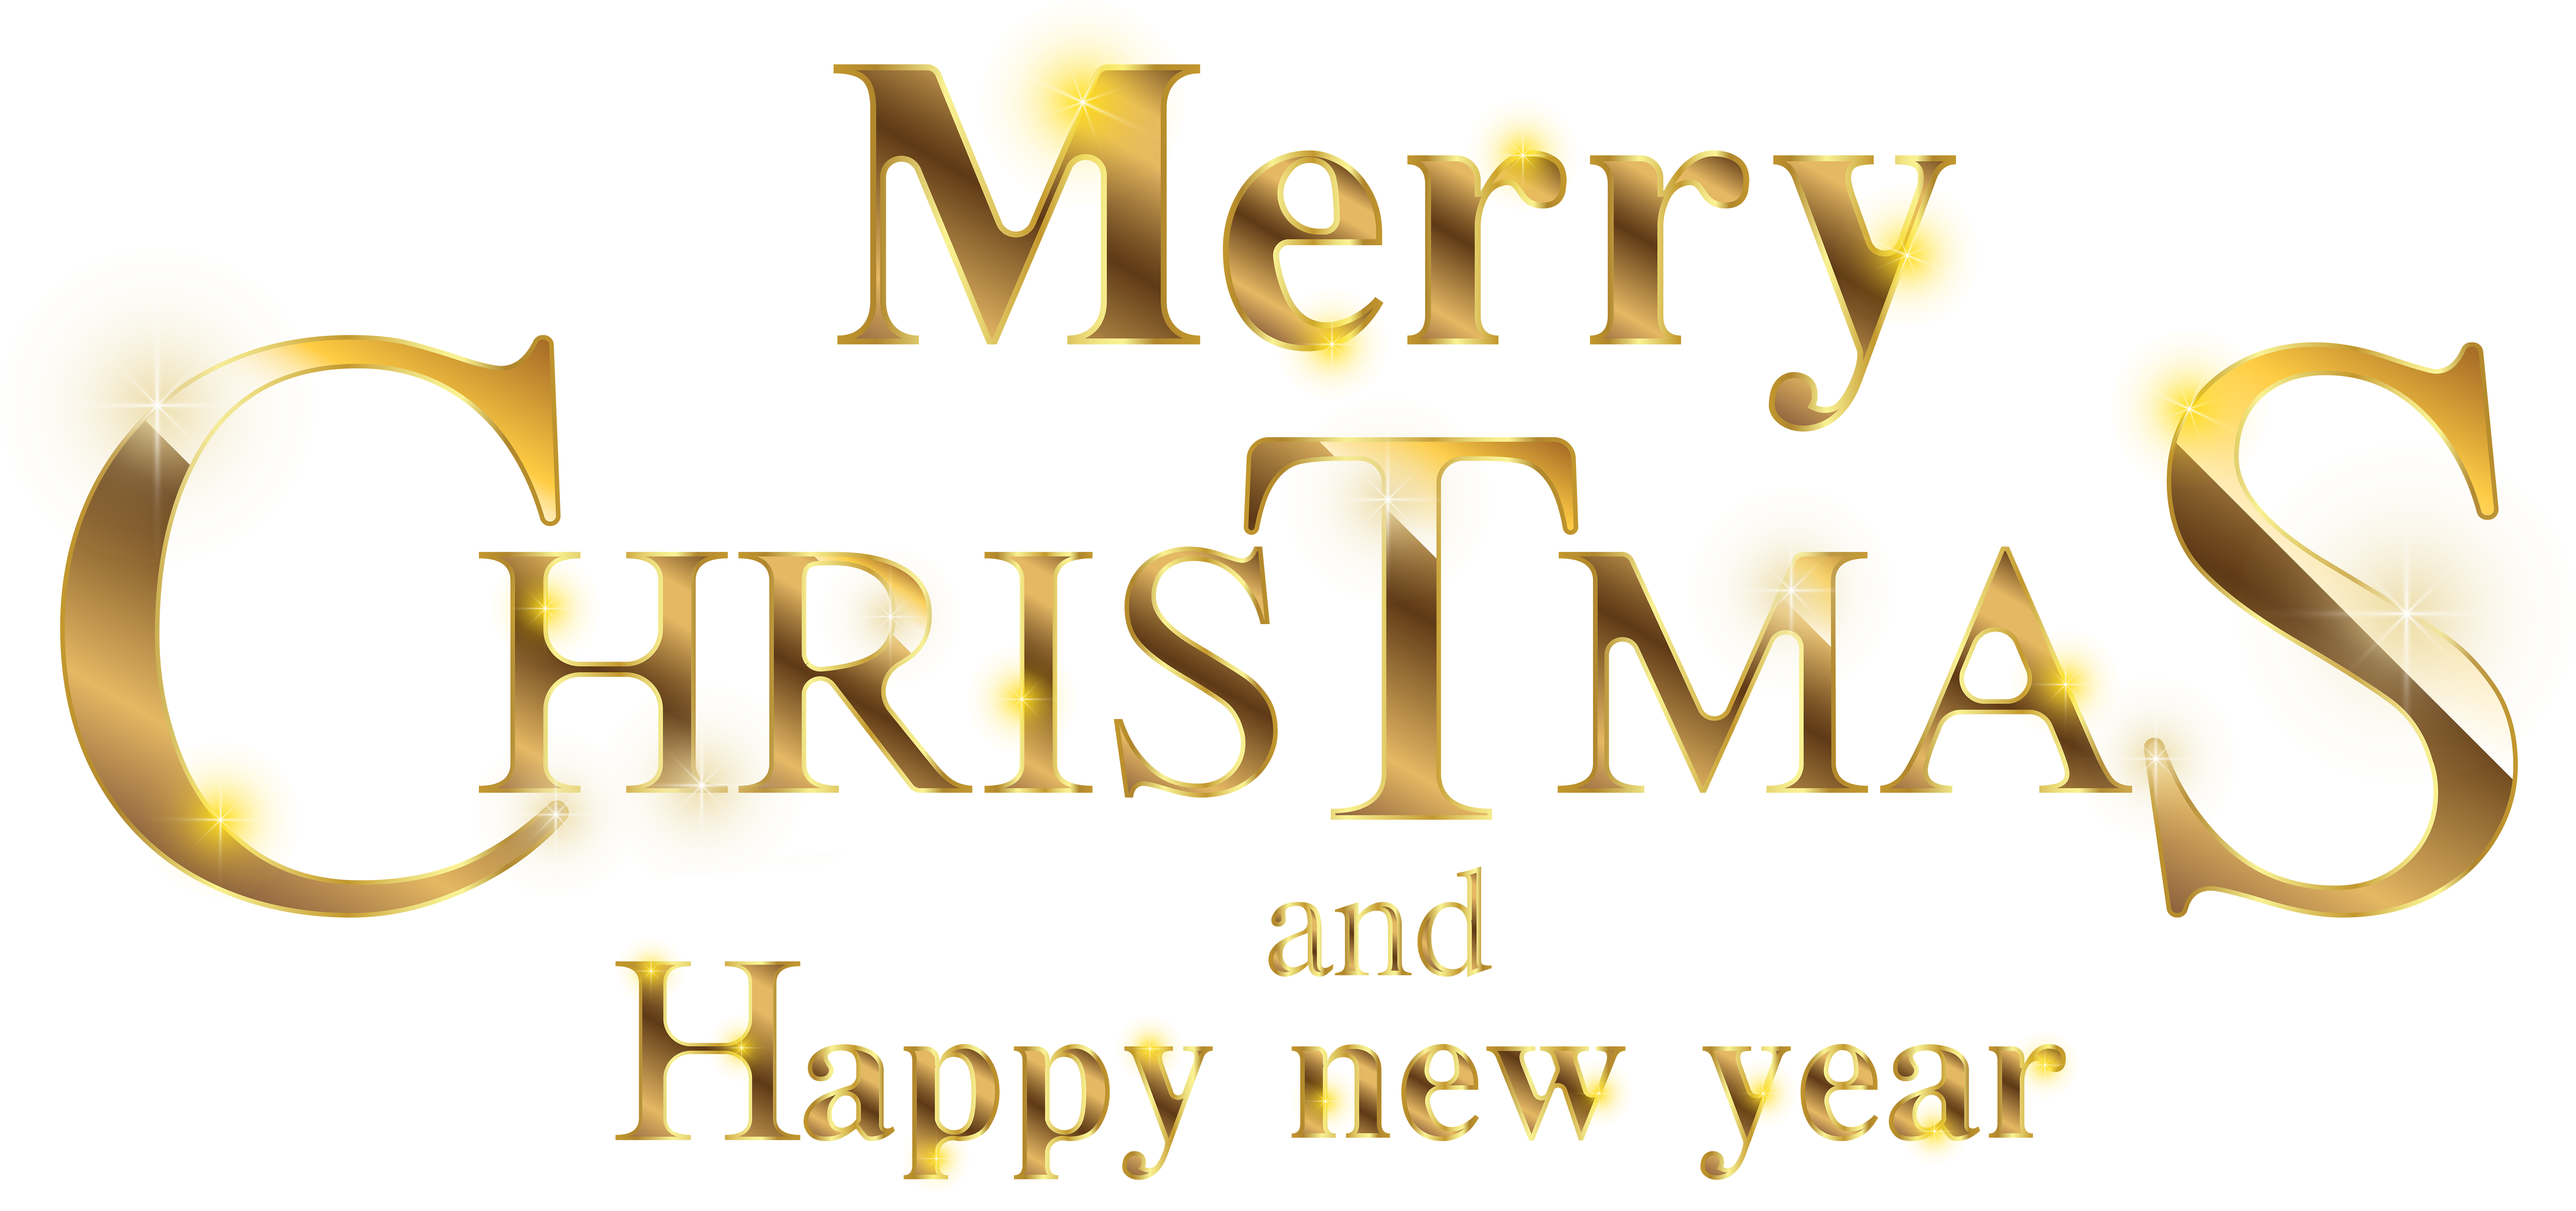 Merry Christmas Gold Transparent Clip Art Image | Gallery Yopriceville - High-Quality Images and ...